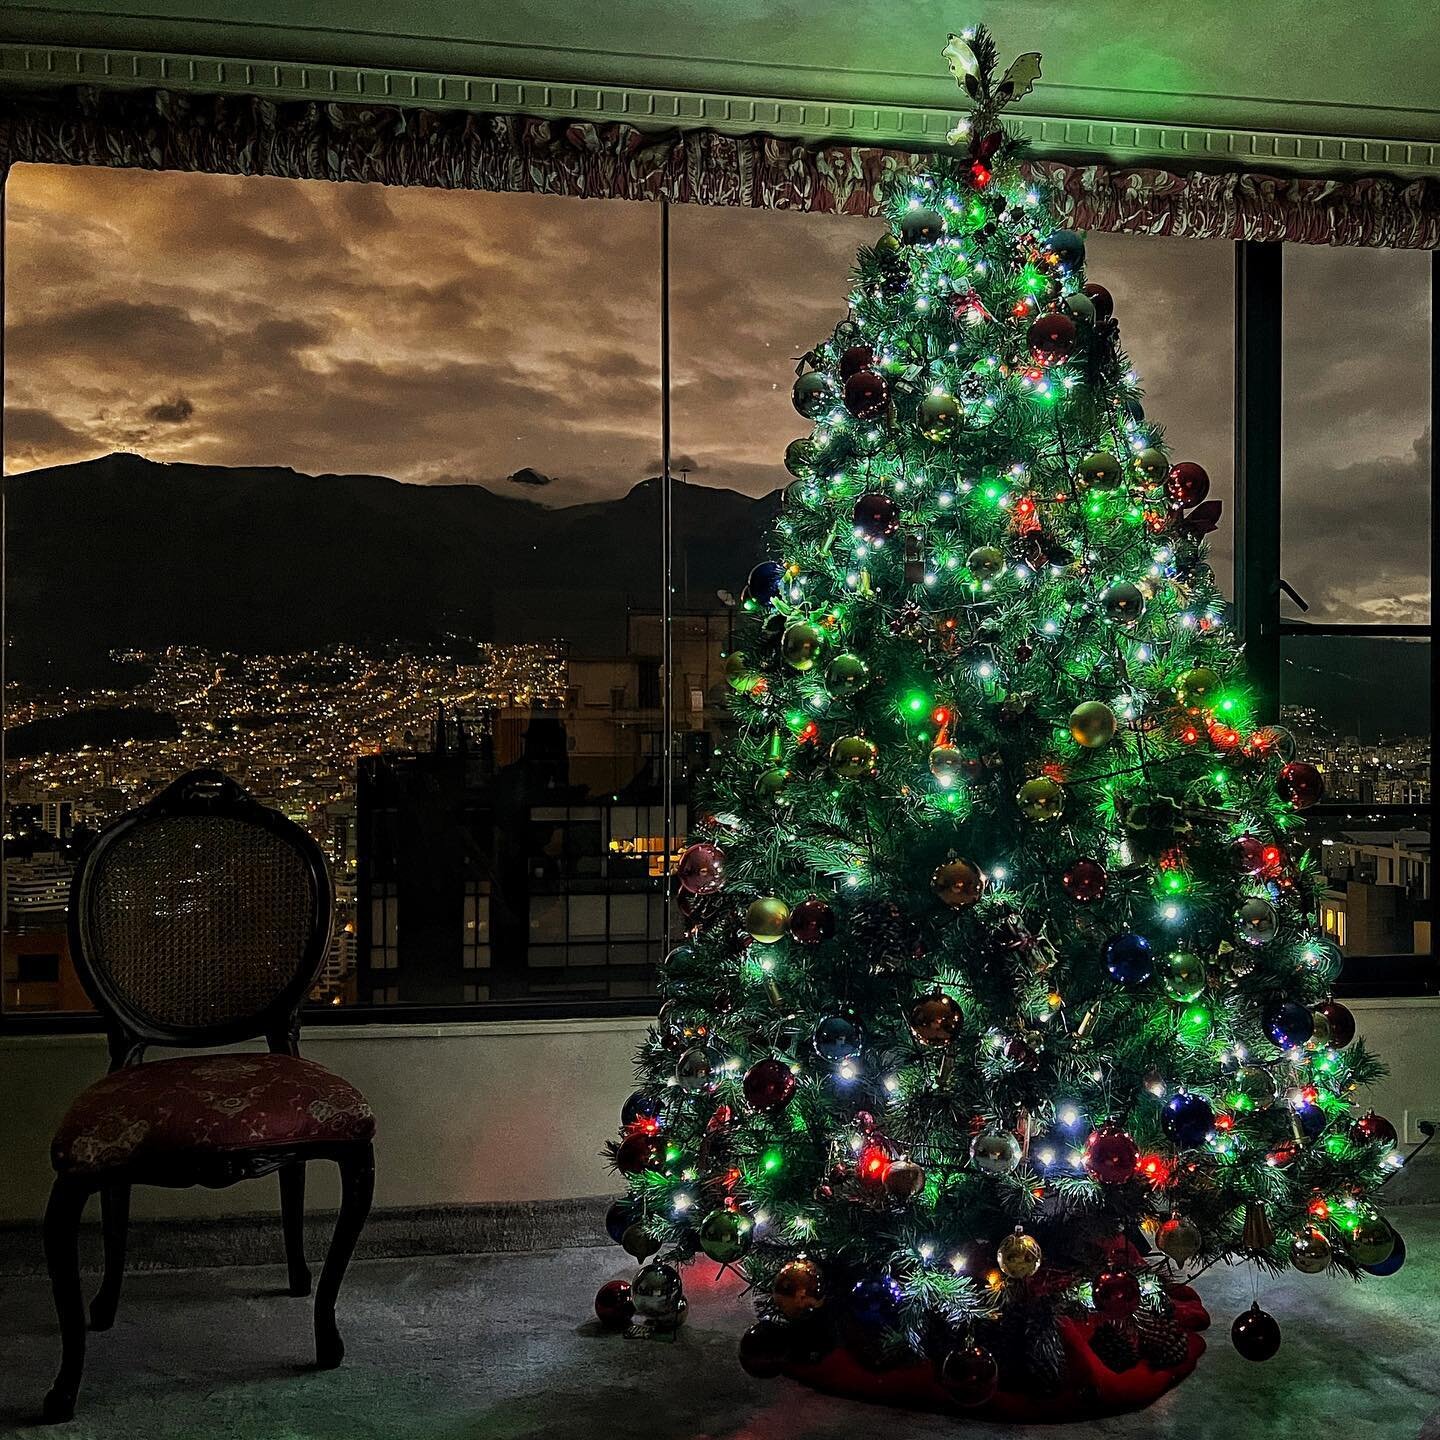 &ldquo;It&rsquo;s beginning to look a lot like Christmas&hellip;&rdquo;. #christmastree #quito #roomwithaview #cityview